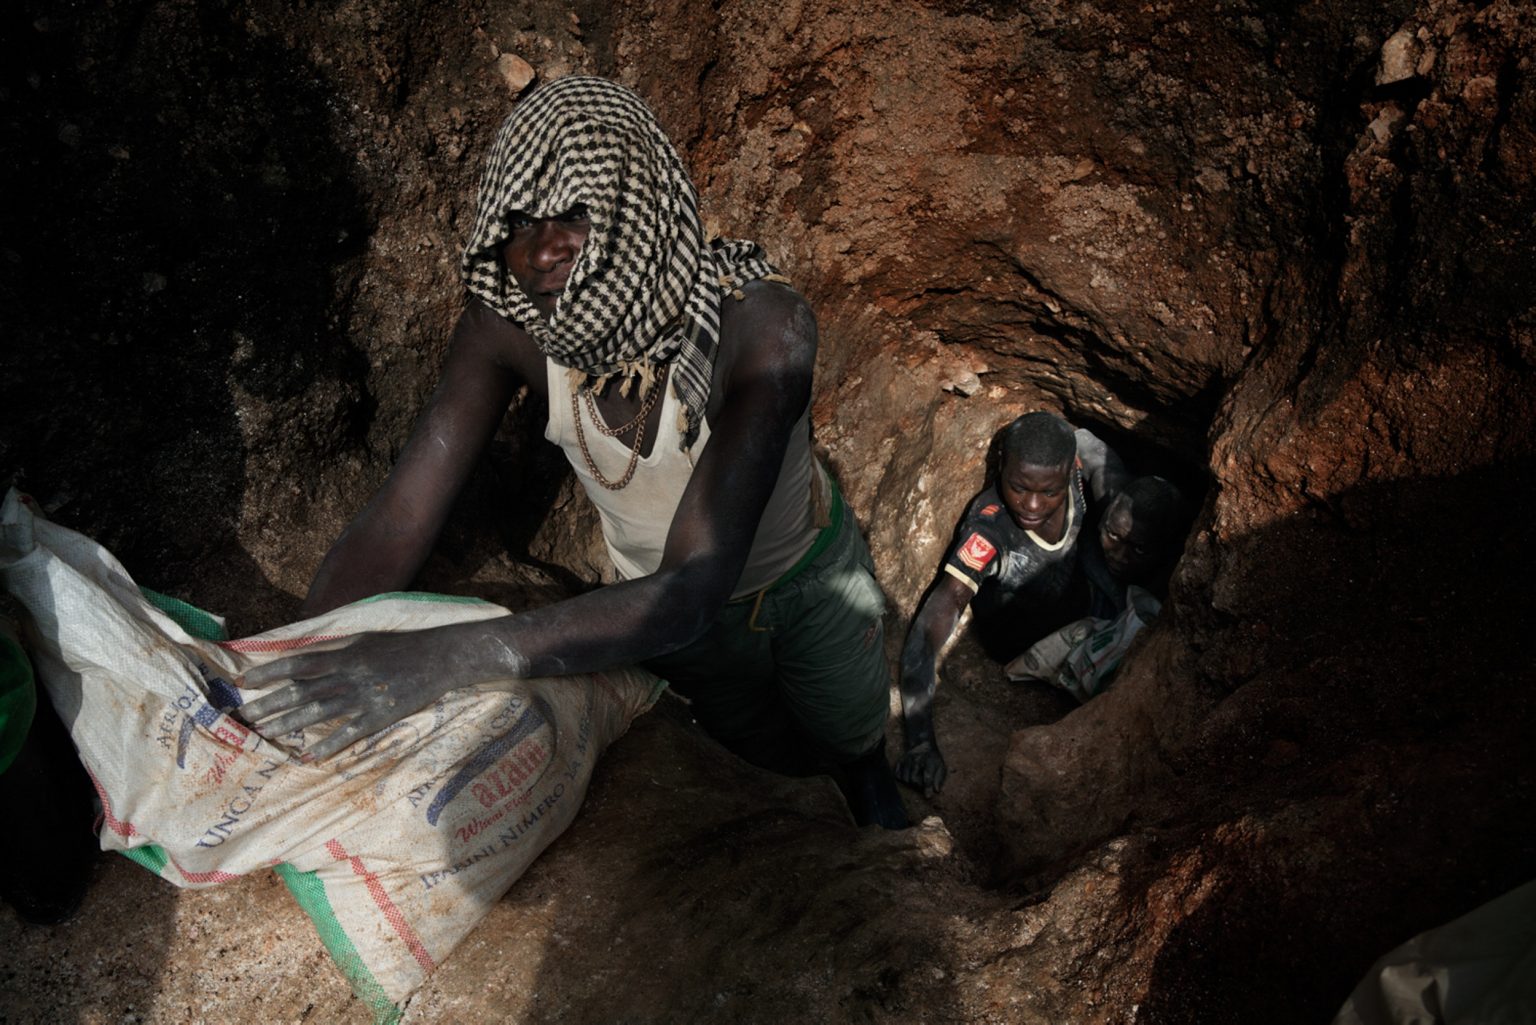 Workers exiting a mine shaft. Miners dig 50 meters underground for the minerals before transporting them to a nearby river where they are separated from rocks and sand before being sold to dealers. Mine accidents are common.  Rubaya, Republic Democratic of Congo, 2013